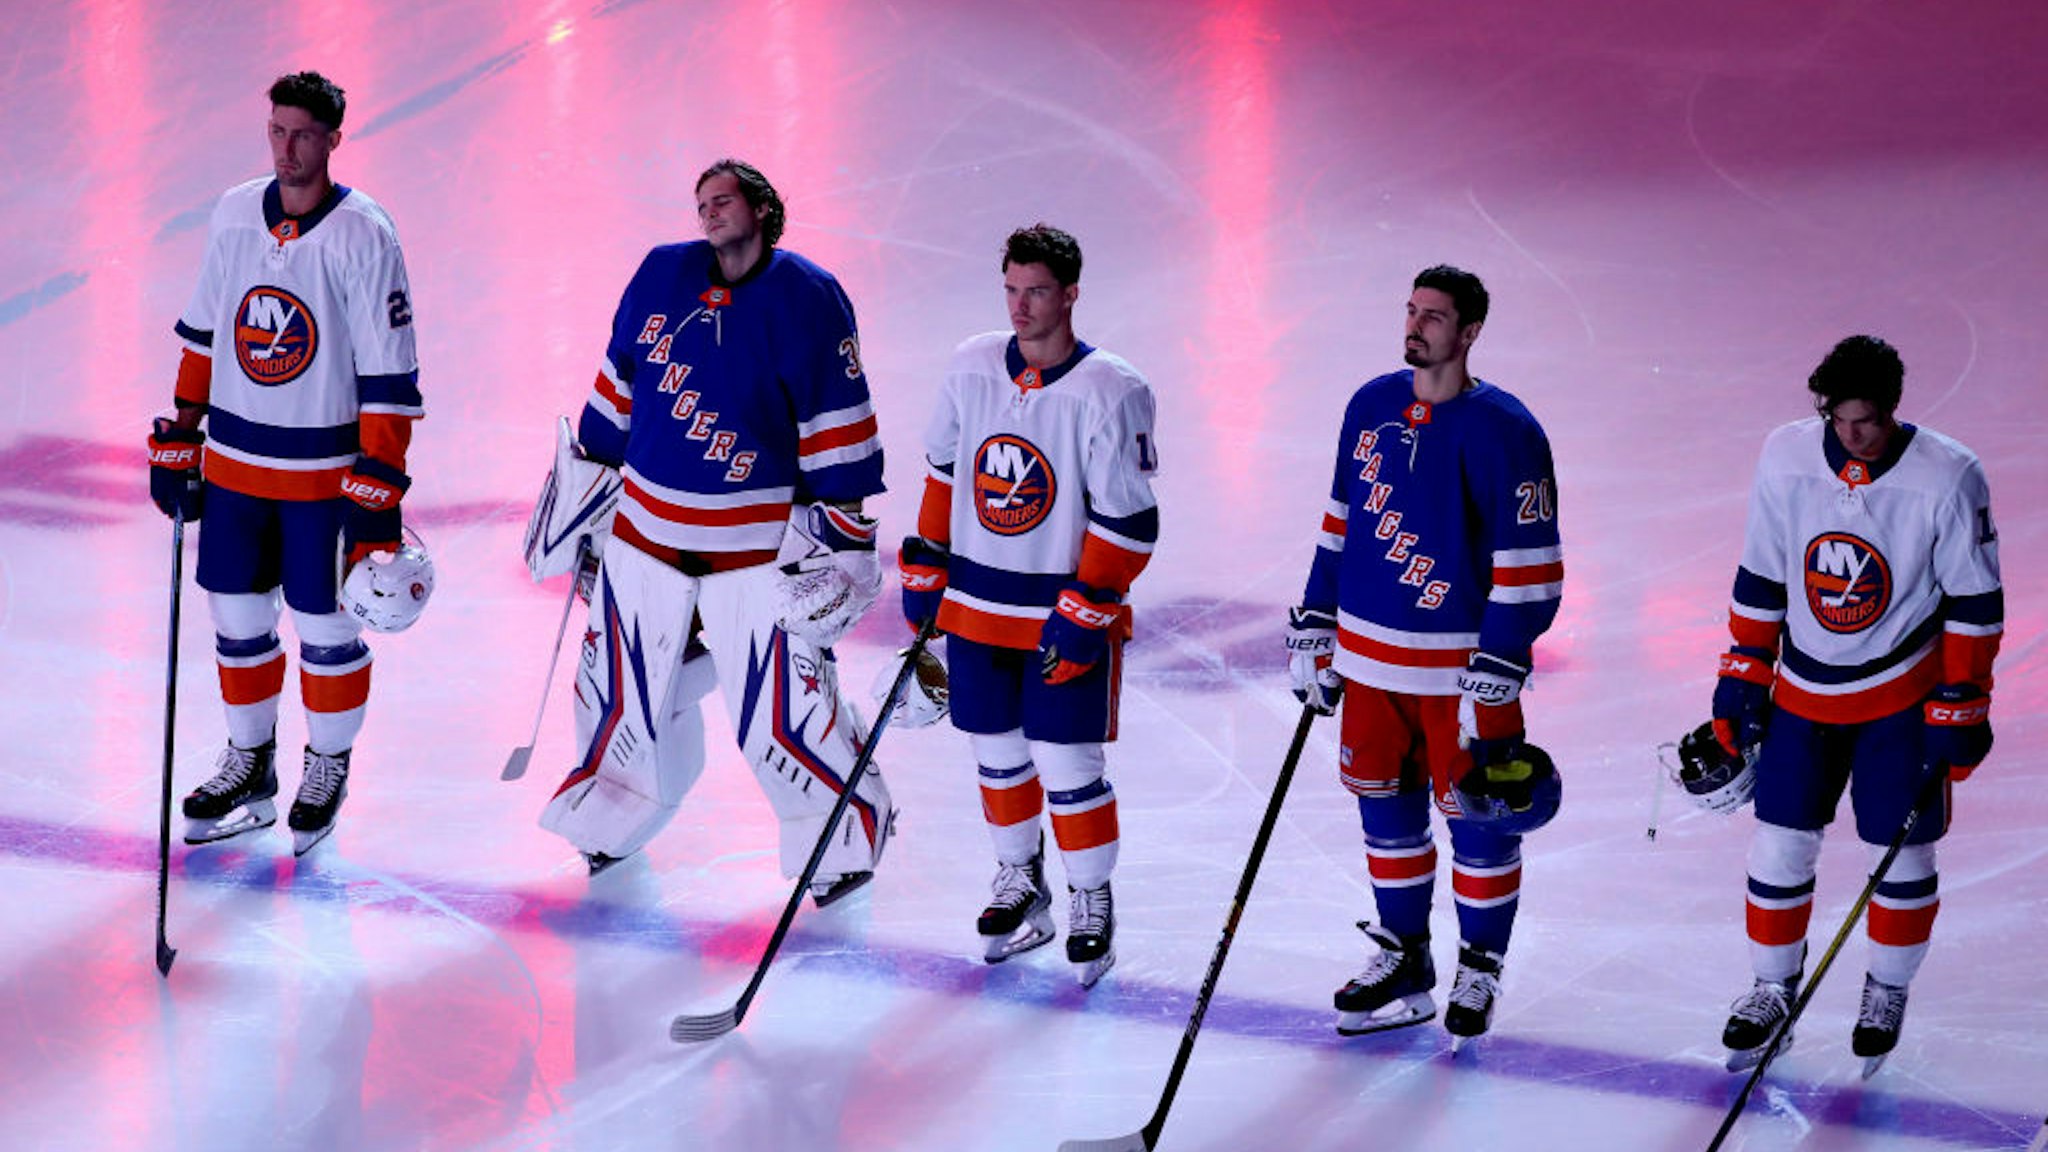 The New York Islanders and the New York Rangers stand together as the Canadian and American national anthems are played before the start of an exhibition game prior to the 2020 NHL Stanley Cup Playoffs at Scotiabank Arena on July 29, 2020 in Toronto, Ontario.